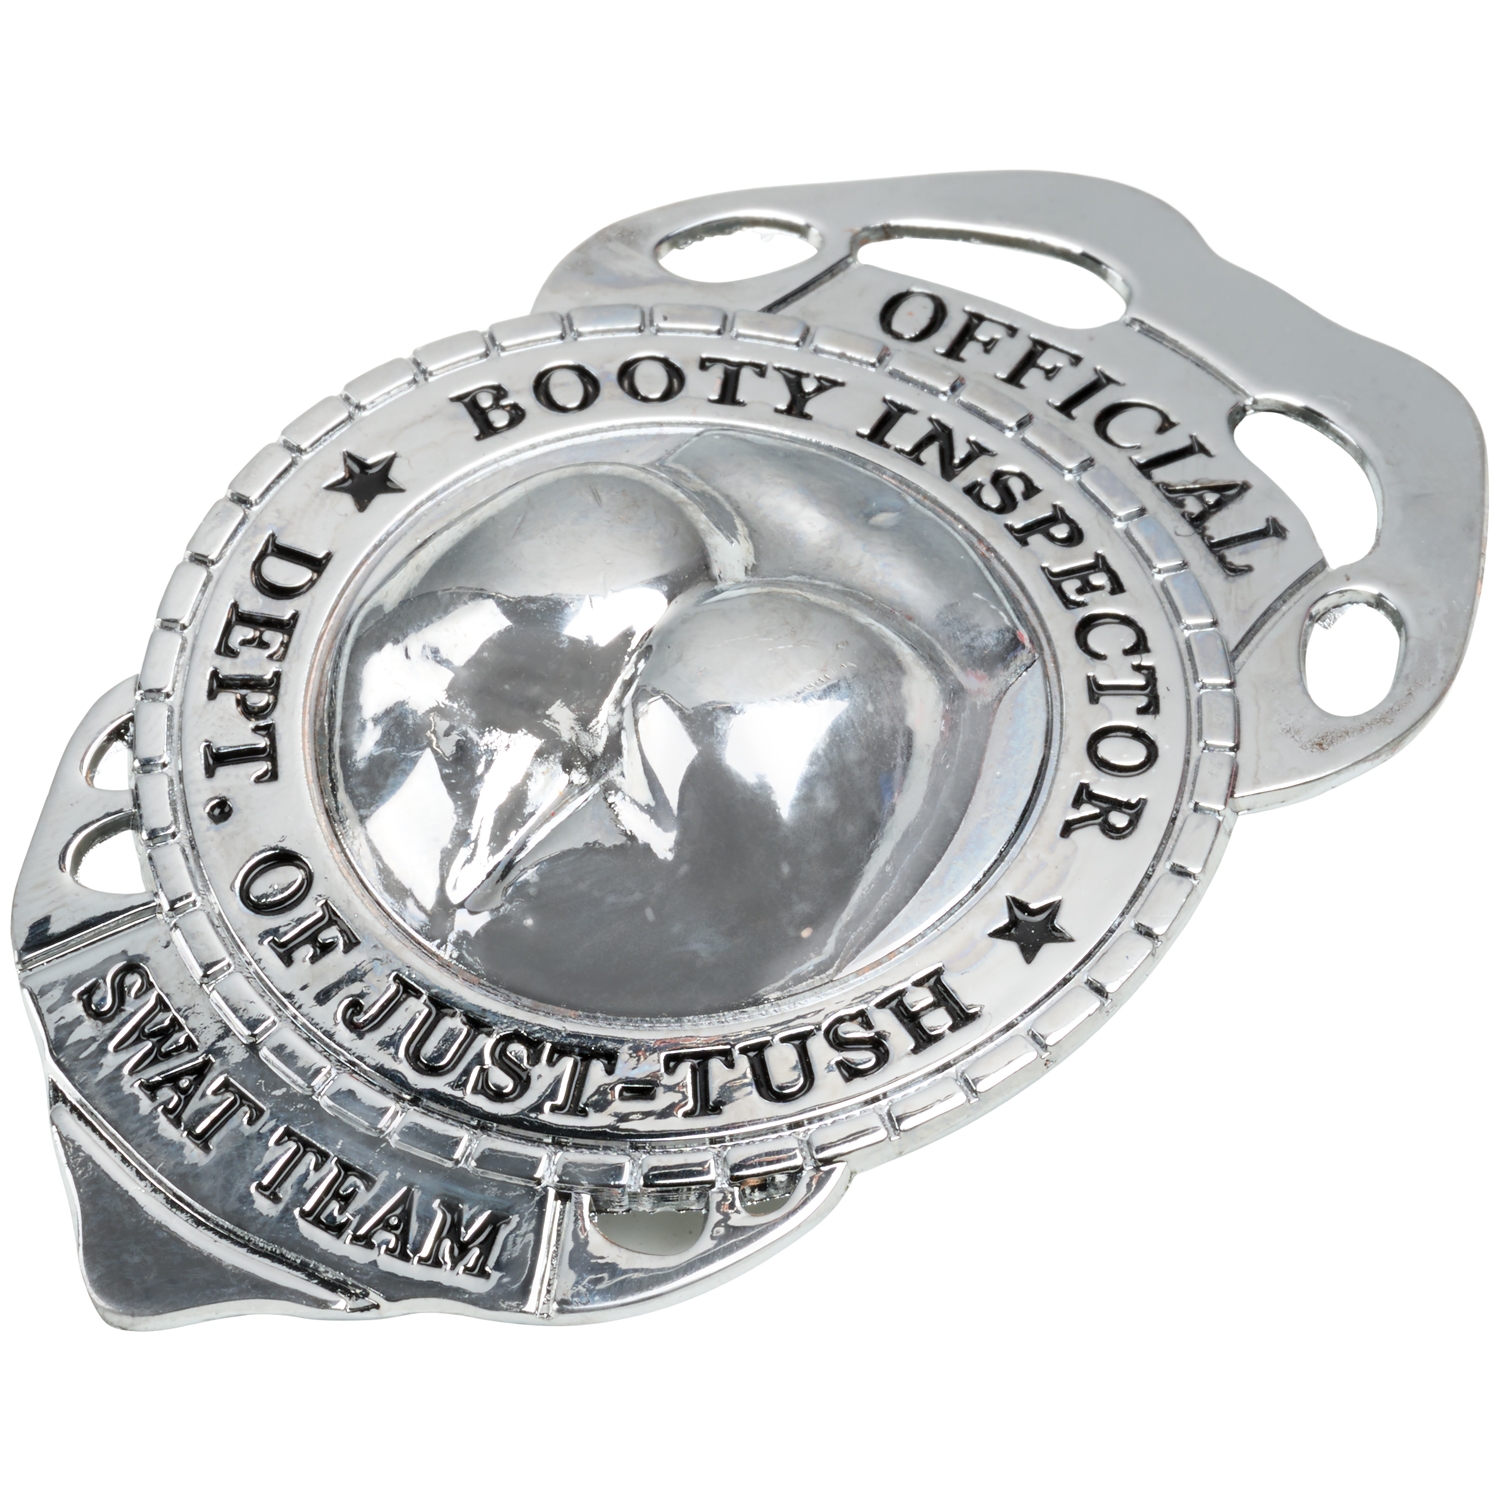 Booty Inspector Badge - Silver